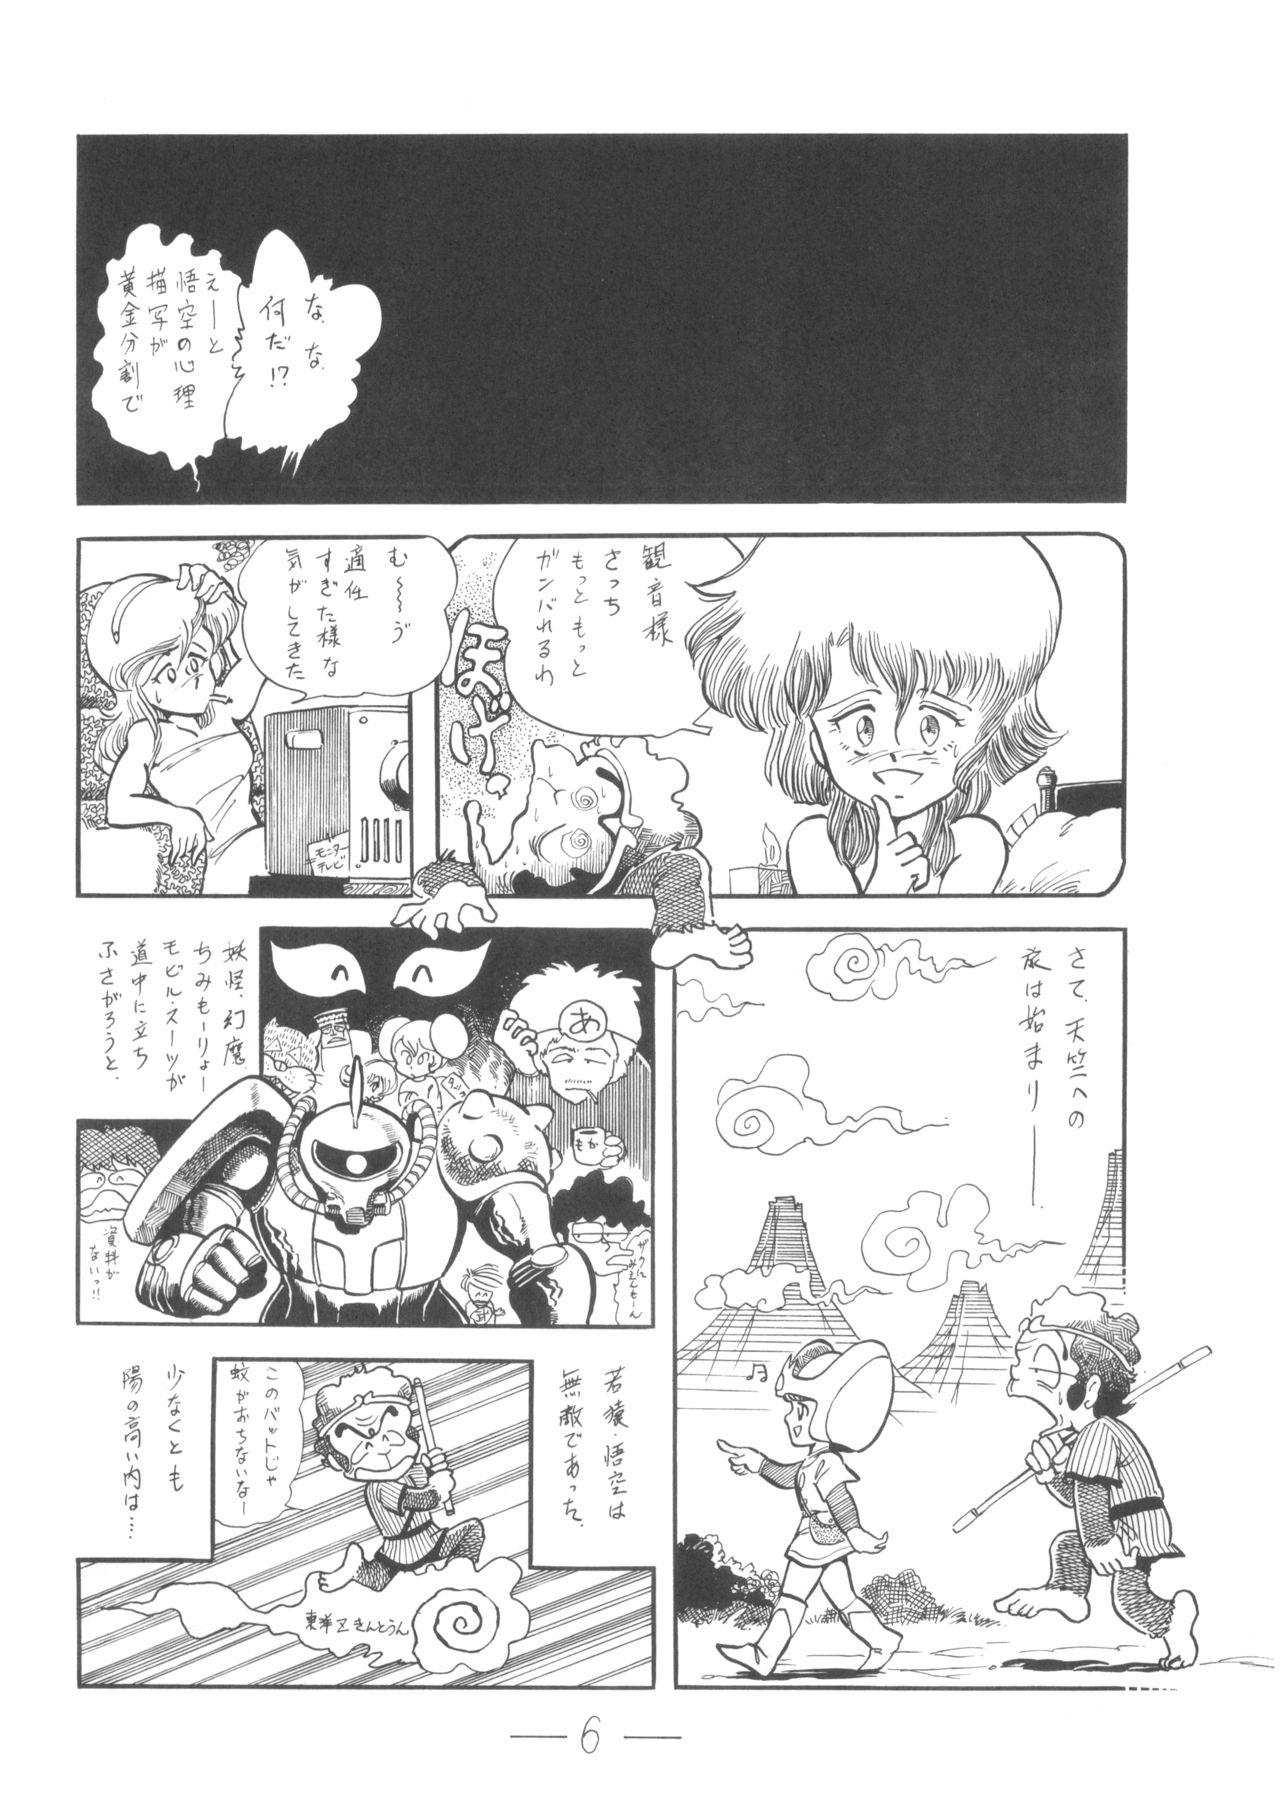 Porra Cybele Vol.6 - Dirty pair Journey to the west Hung - Page 7